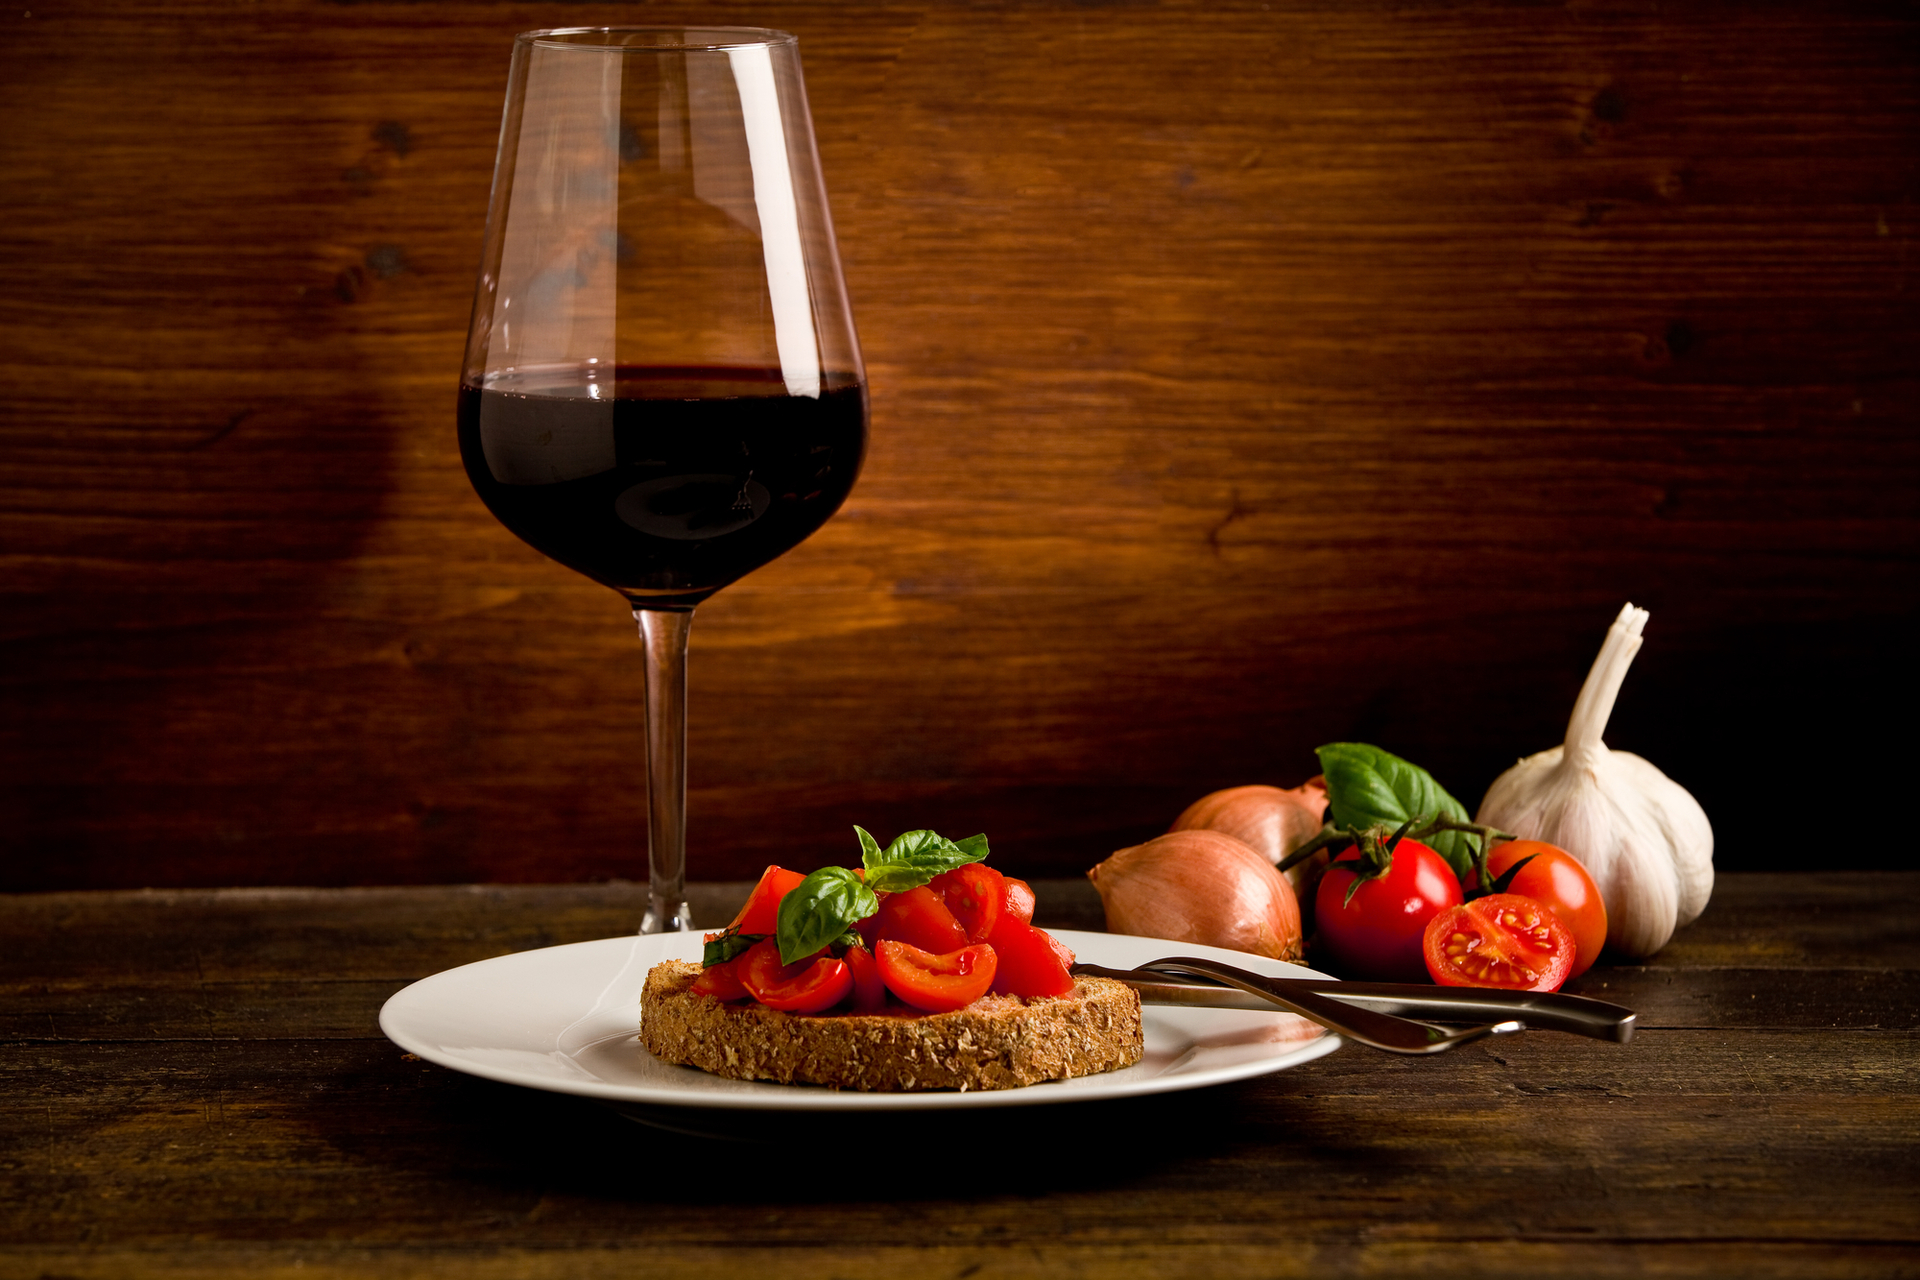 Bruschetta appetizer with corvina wine on wooden table